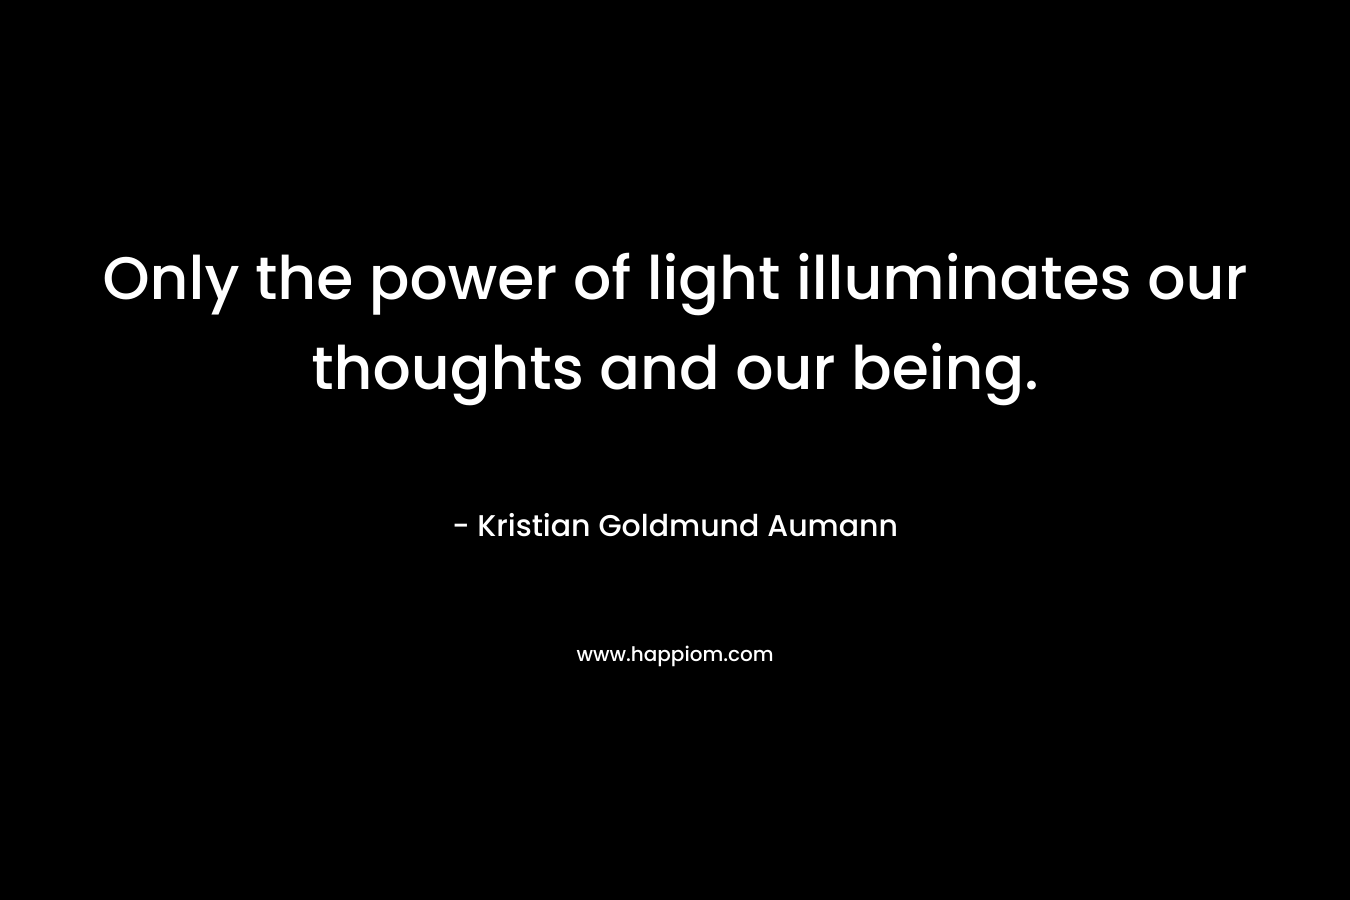 Only the power of light illuminates our thoughts and our being.